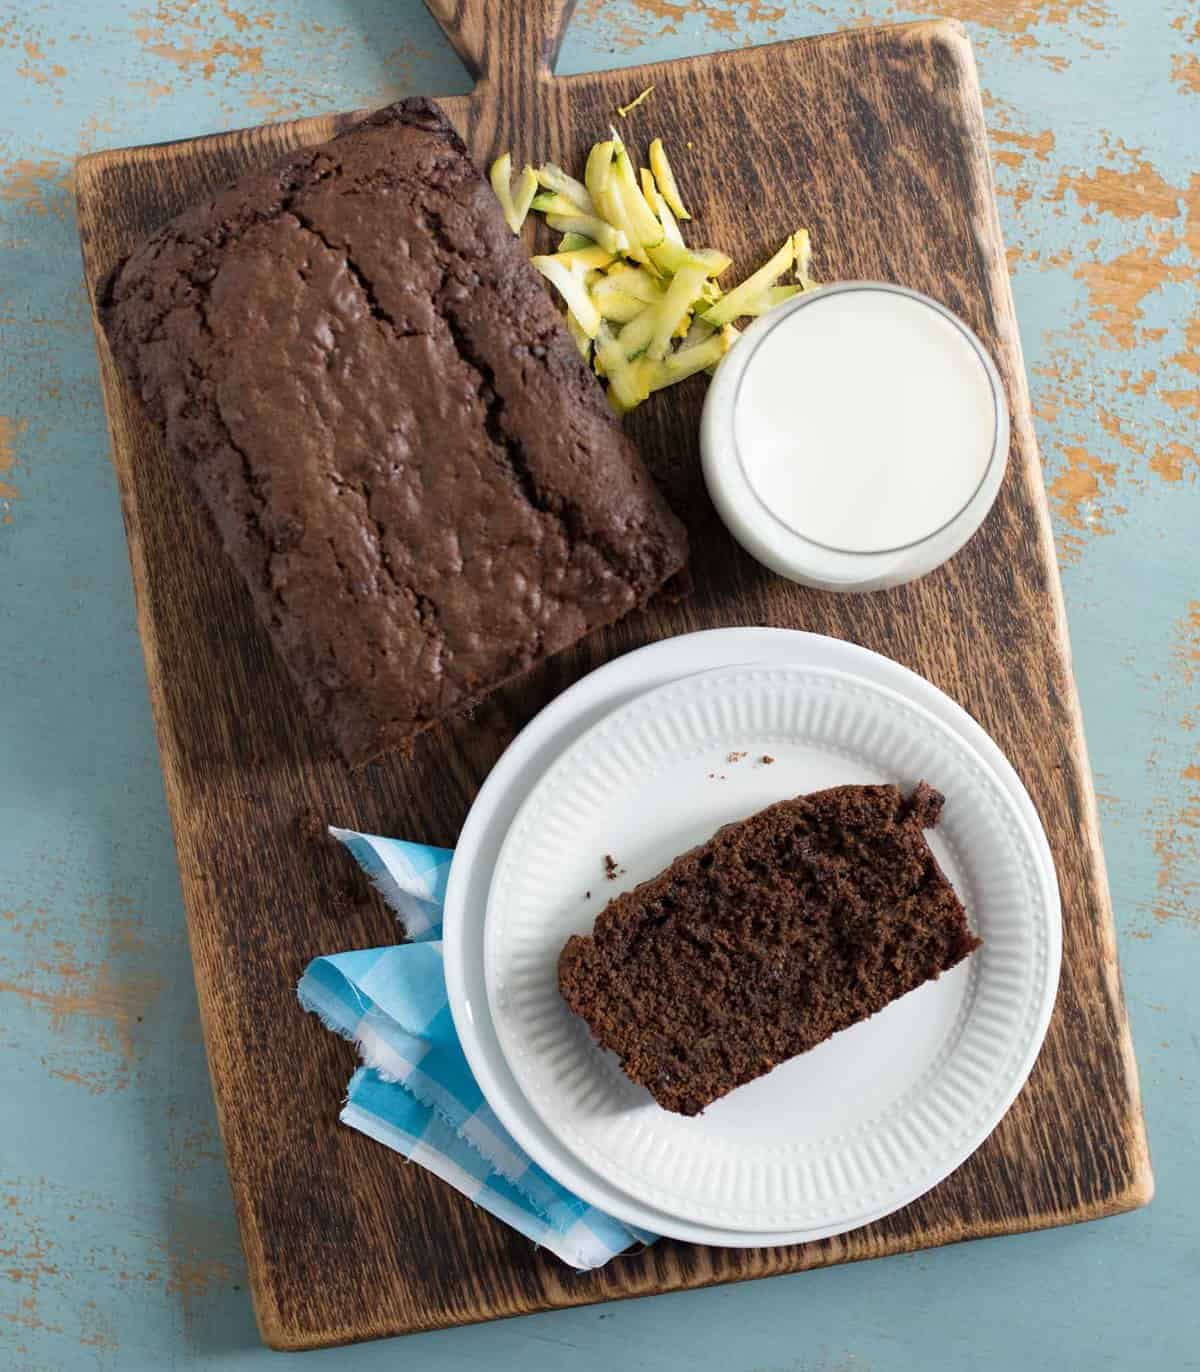 Chocolate zucchini bread that is rich, moist, and perfectly sweet with the addition of chocolate chips for good measure.